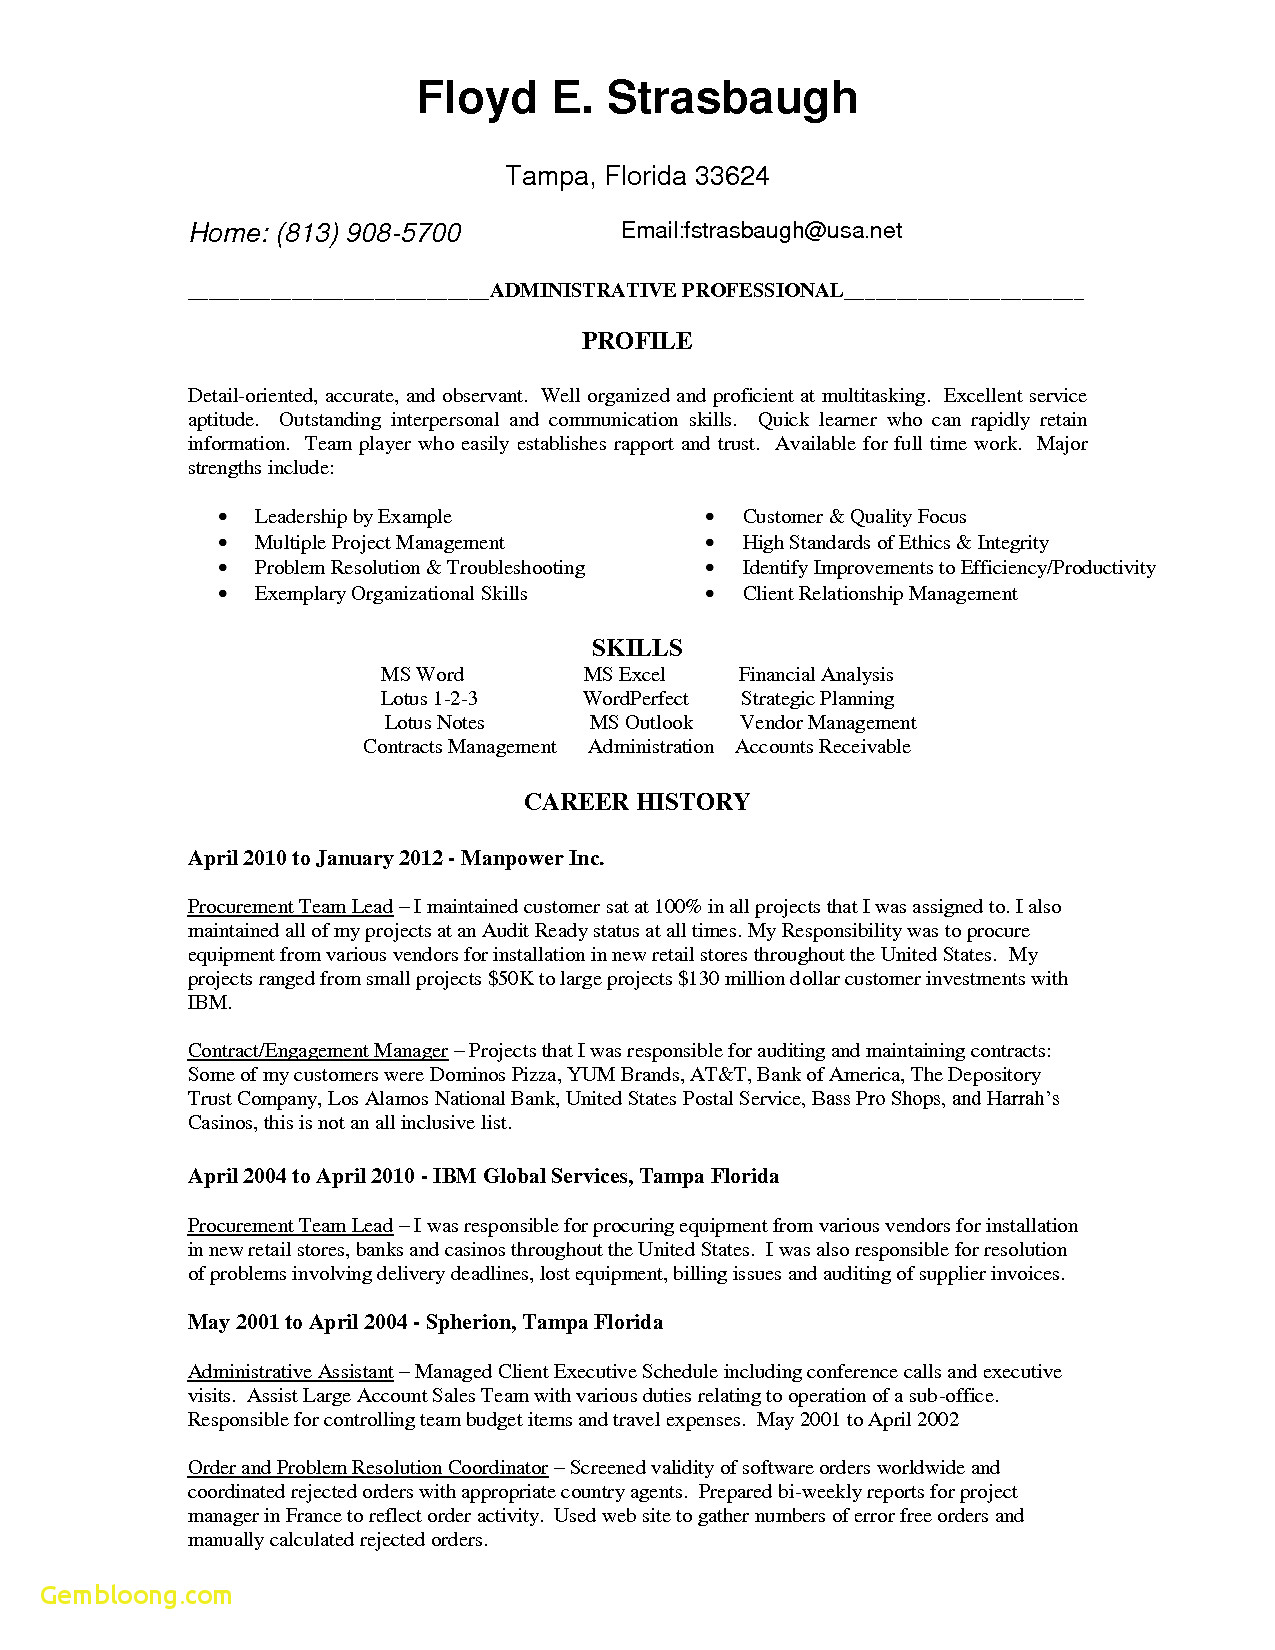 insurance marketing letter template example-Insurance Resume Templates Download now Professional Job Resume Template Od Specialist Cover Letter Lead 16-l